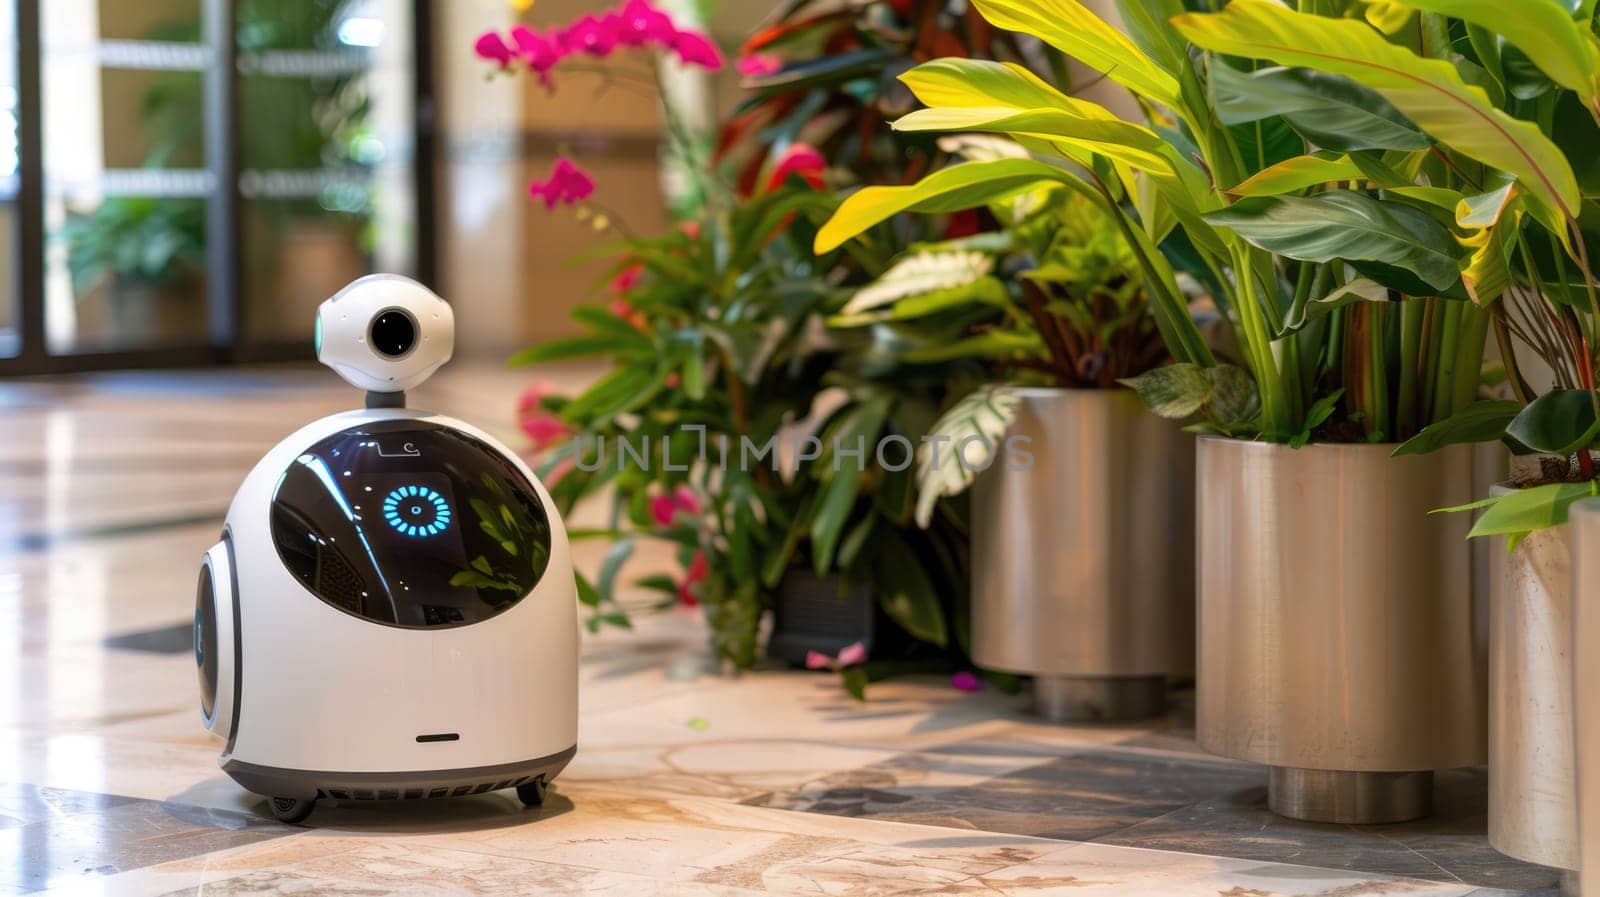 The robot helps in caring for flowers. Robot - greenhouse worker AI